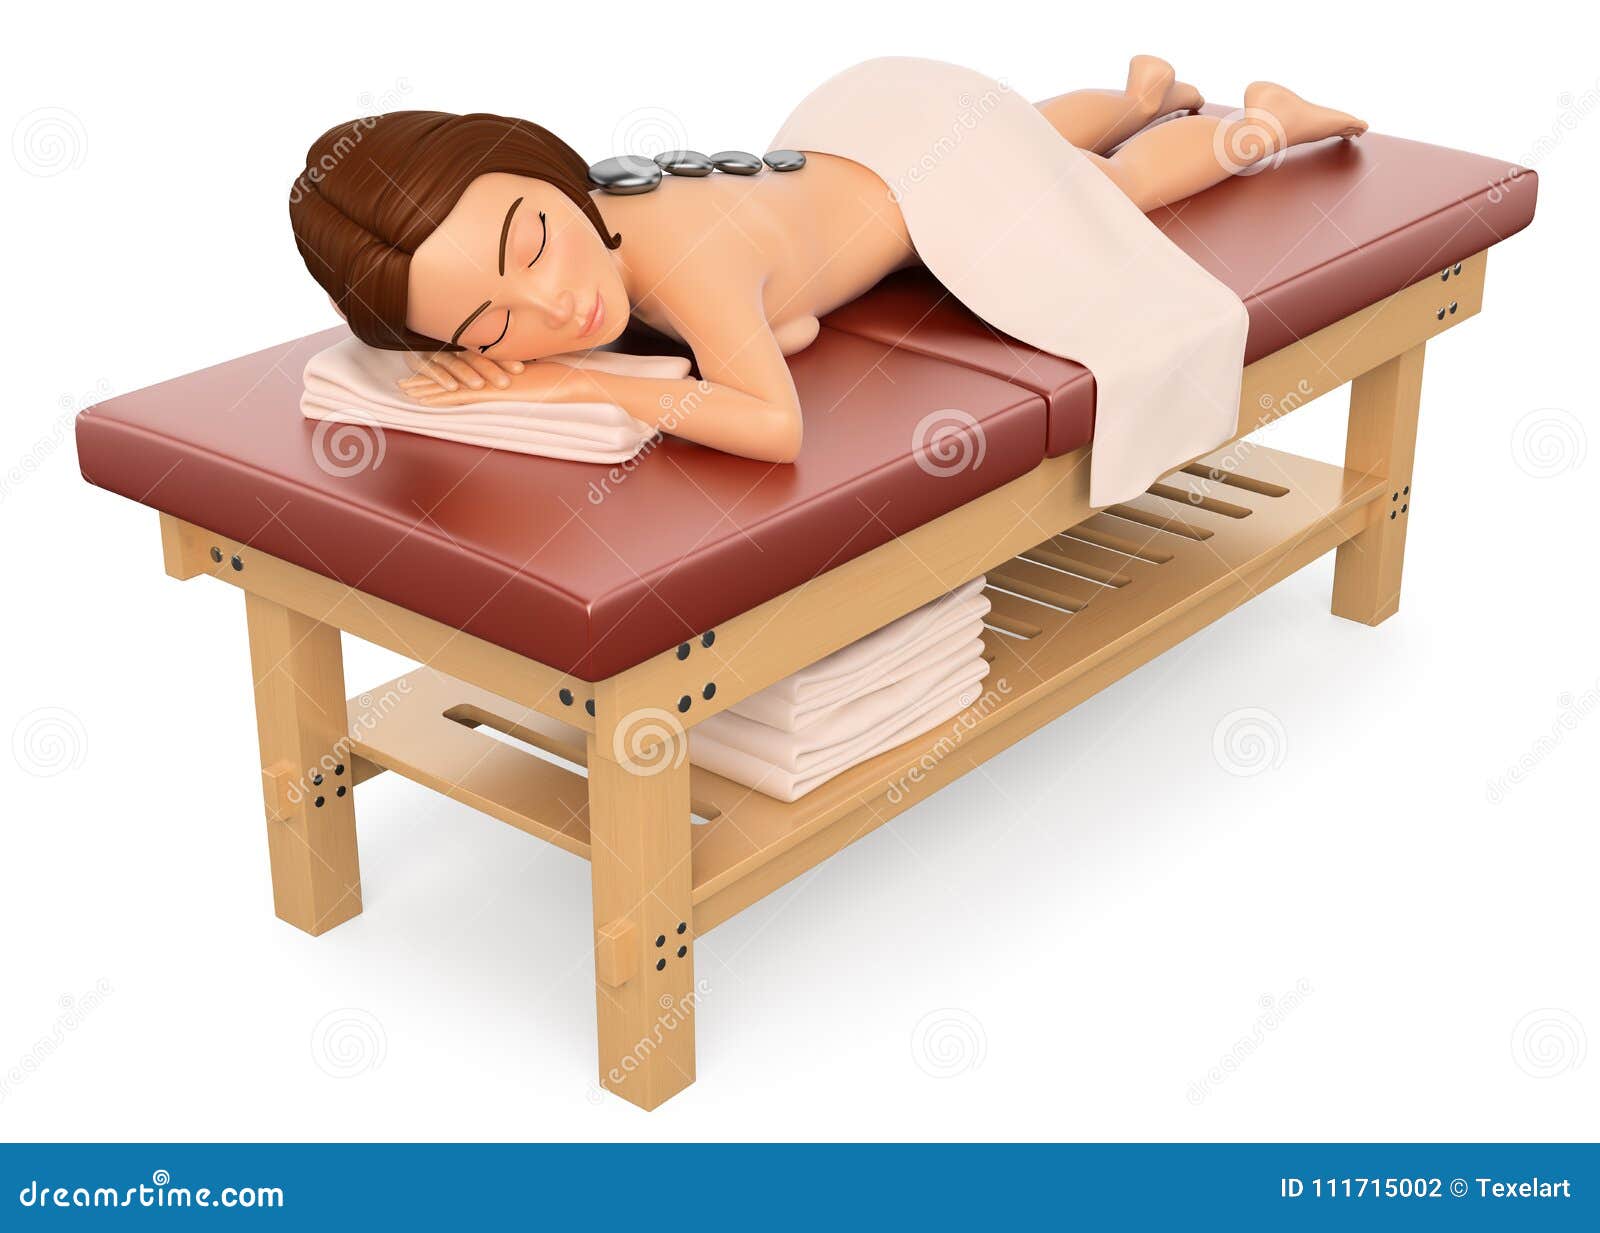 Woman relaxed and lying on a massage table. 